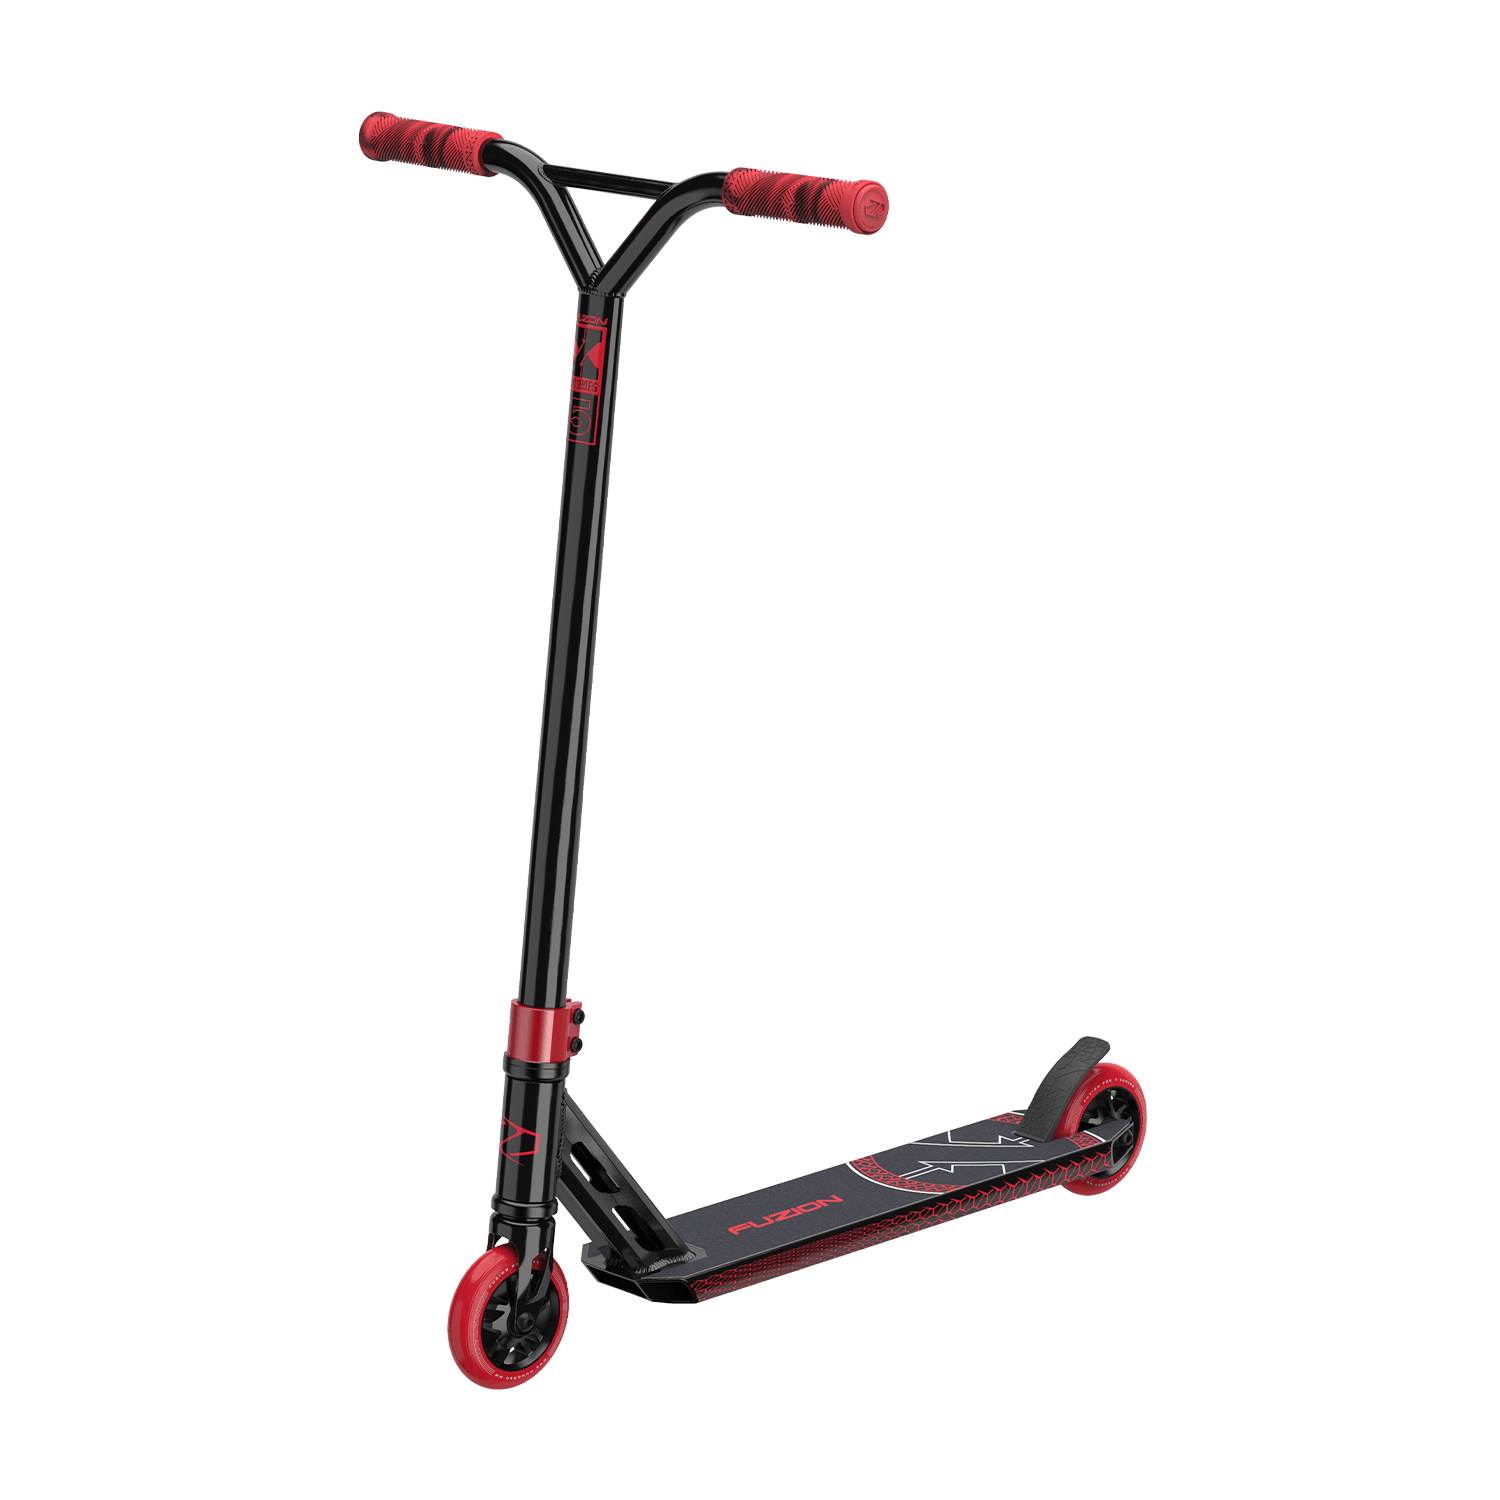 Fuzion X-5 Scooter - The Best Beginner Pro Scooter – Fuzion Pro 